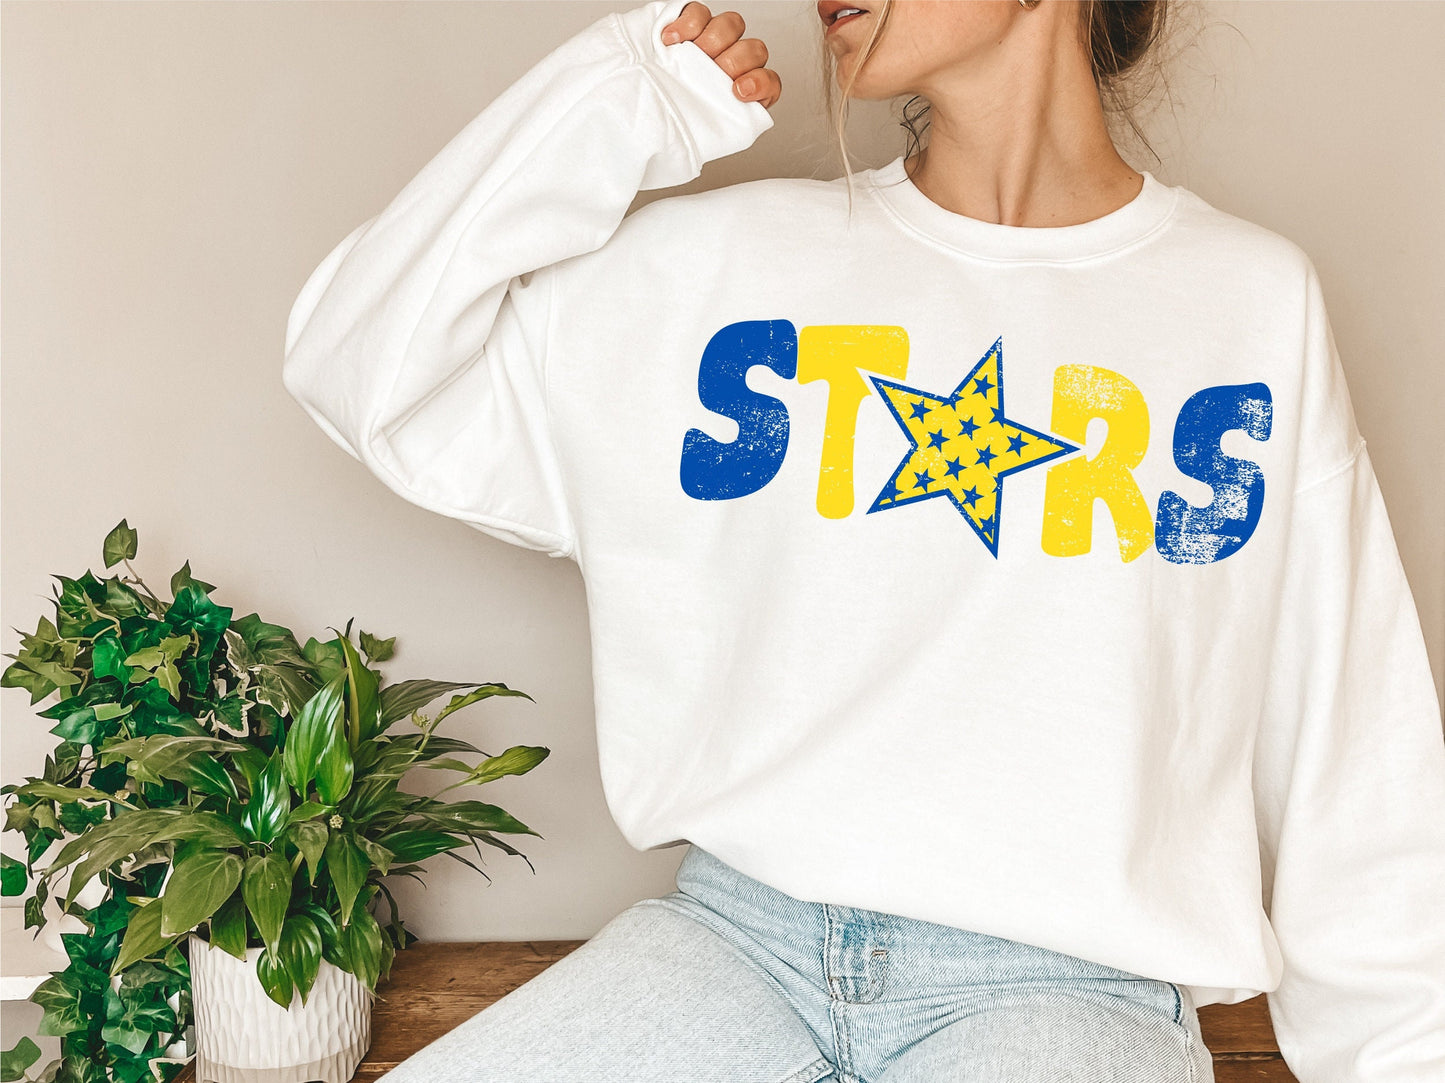 Stars Distressed Star PNG, Stars png, Retro Letter Digital Design Blue & Yellow